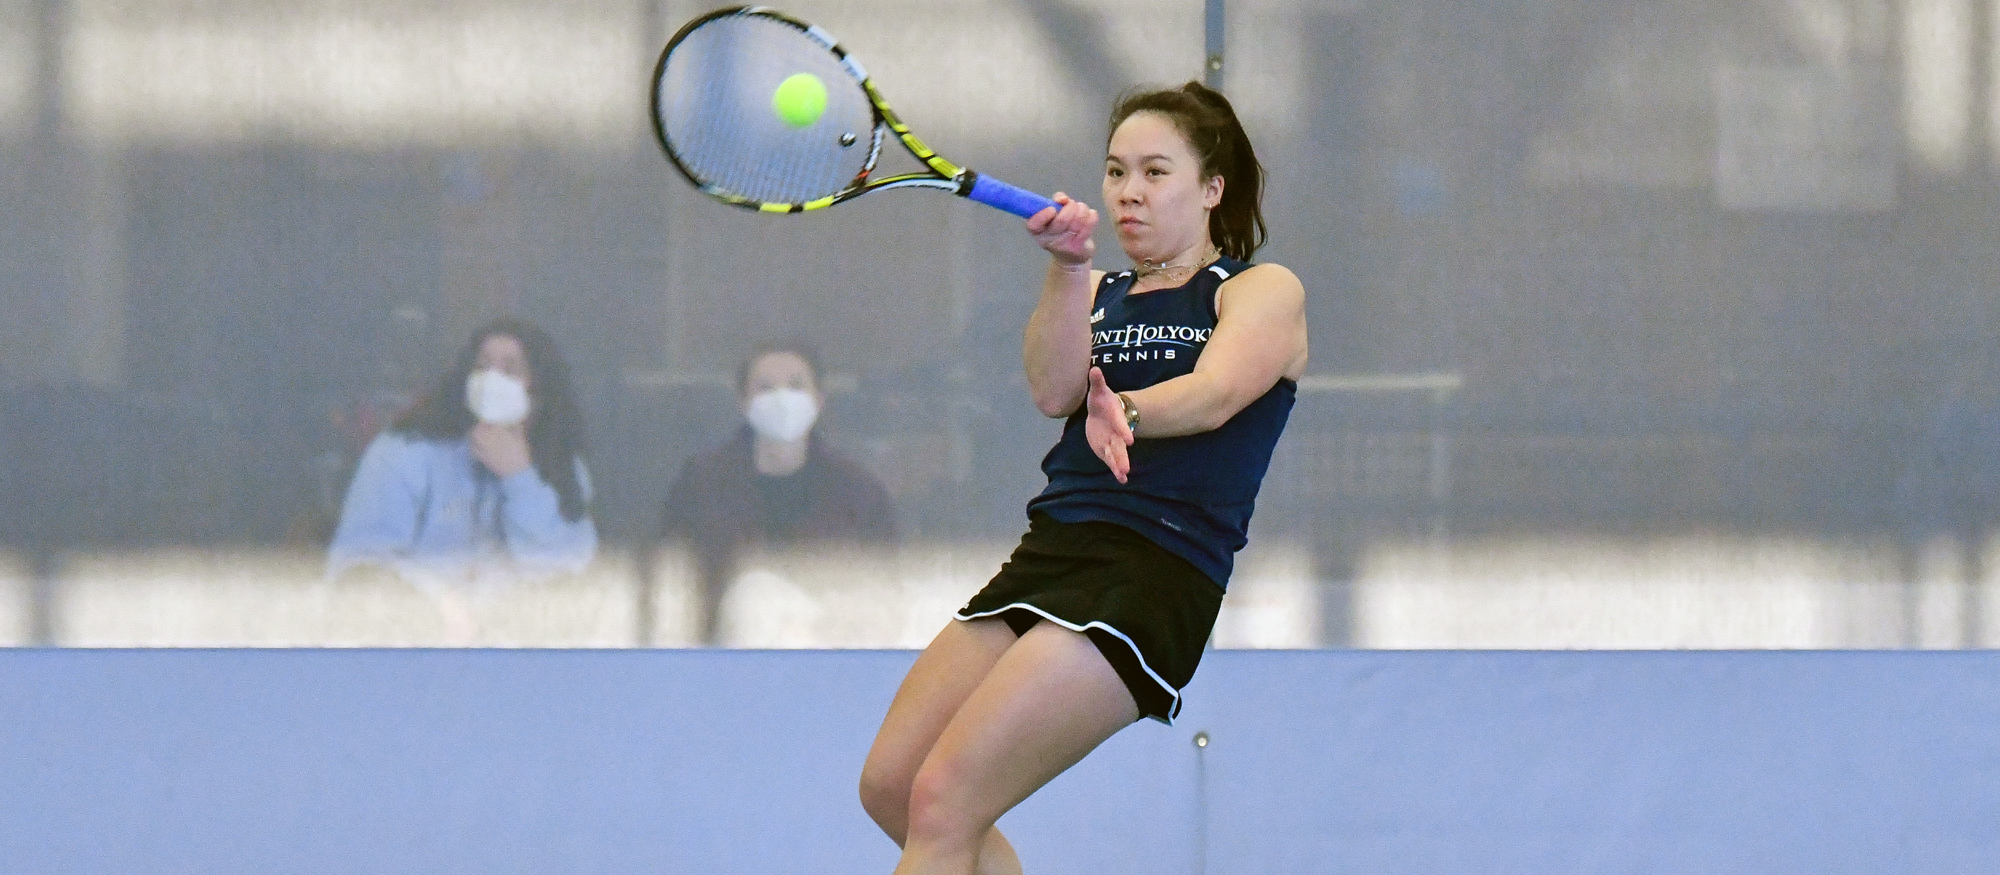 Annika Chai and Mount Holyoke tennis lost 9-0 at Bates College on March 15, 2023. (RJB Sports file photo)